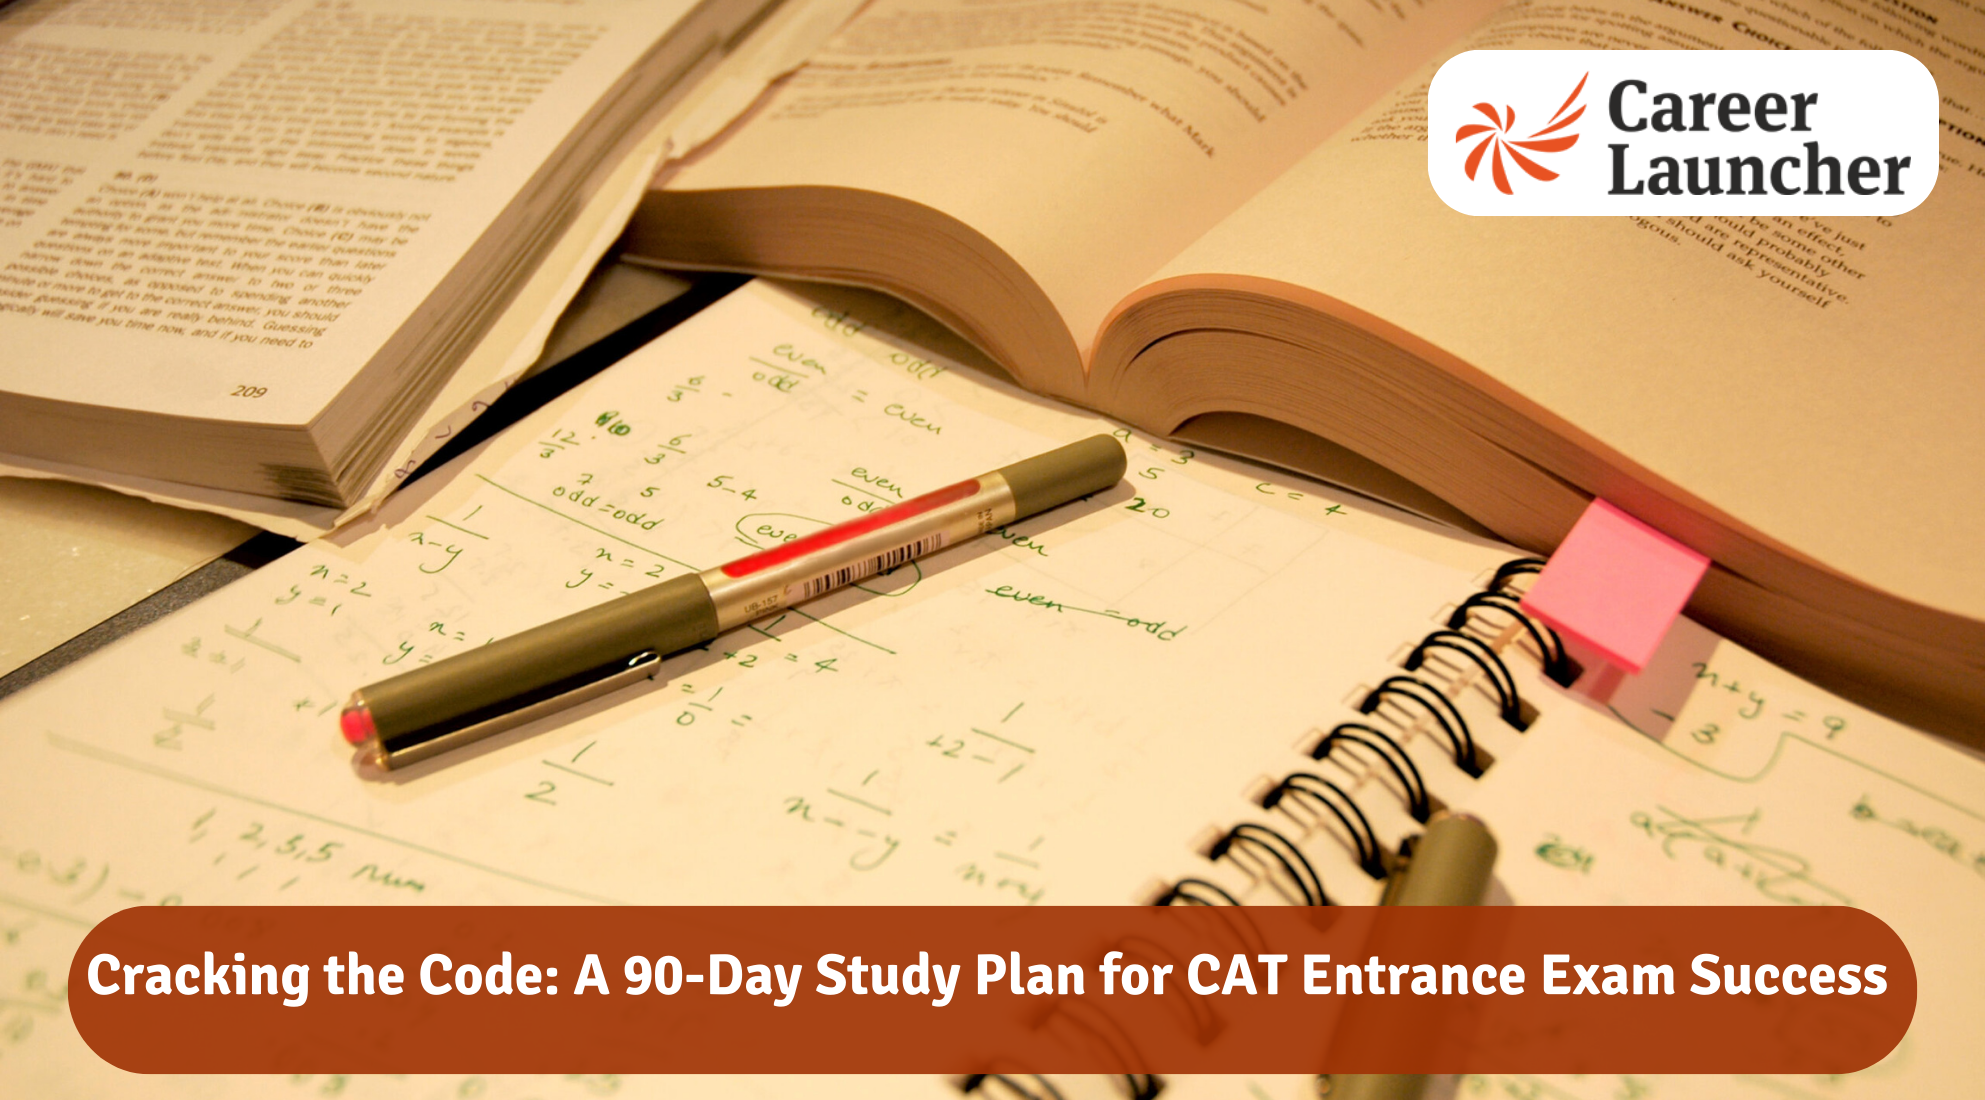 Cracking the Code: A 90-Day Study Plan for CAT Entrance Exam Success